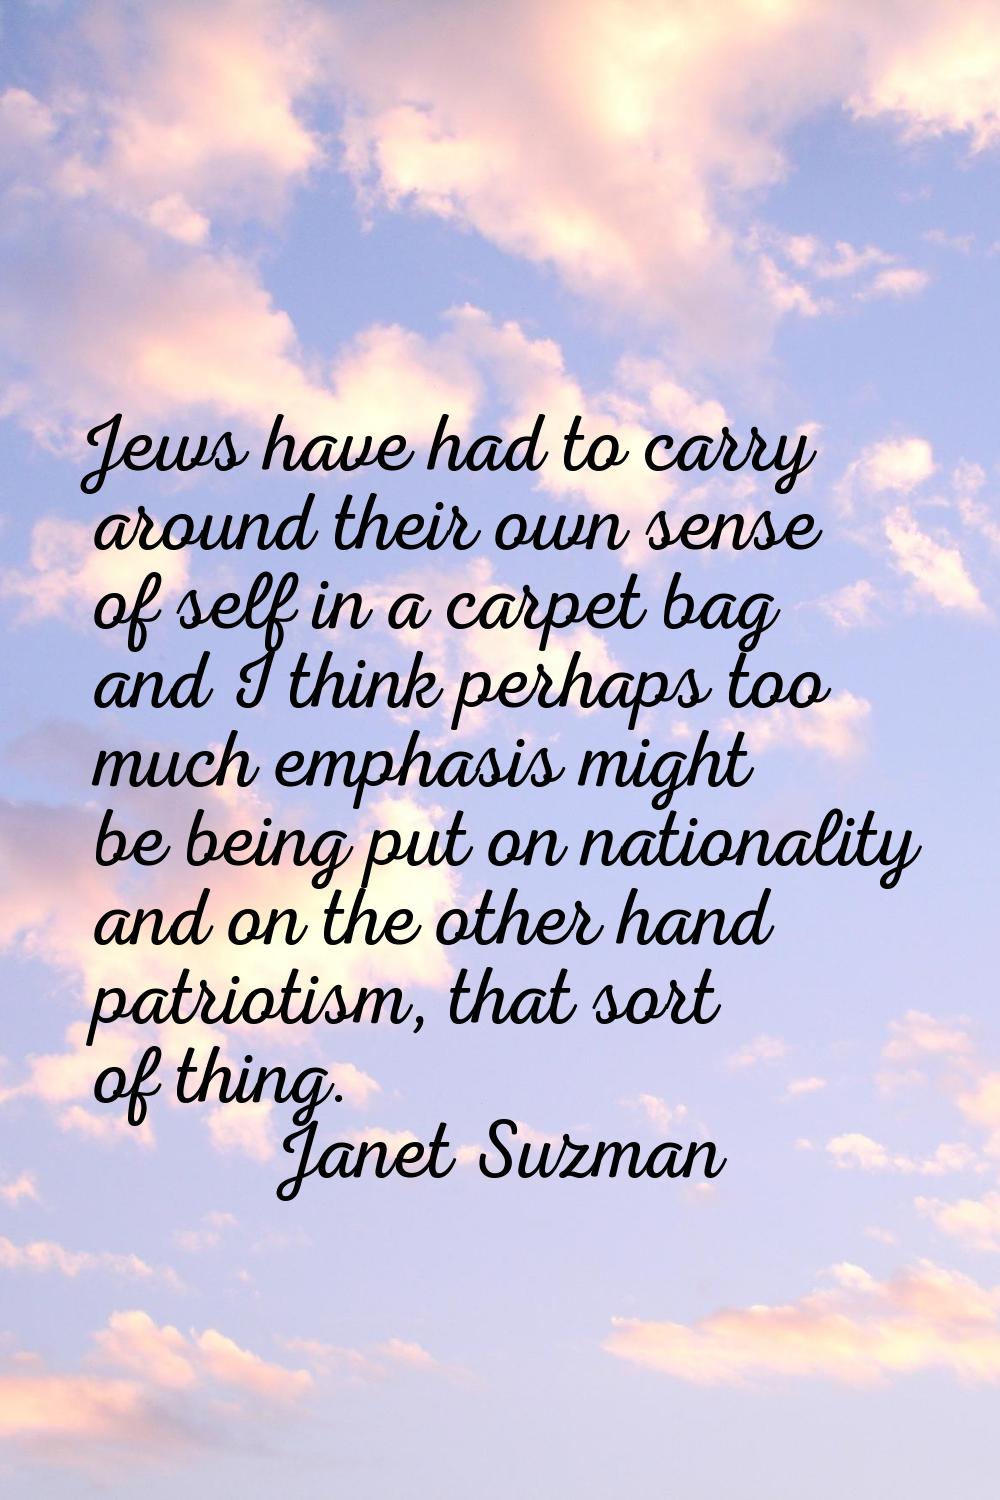 Jews have had to carry around their own sense of self in a carpet bag and I think perhaps too much 